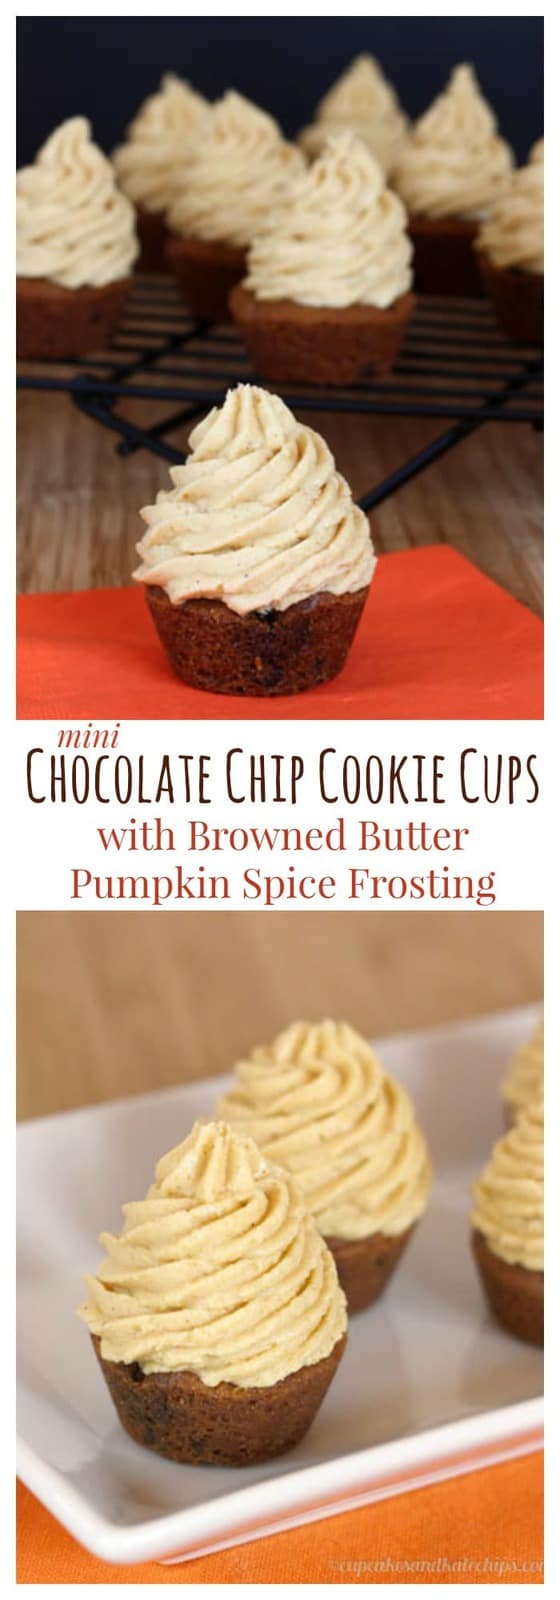 Mini Chocolate Chip Cookie Cupcakes with Browned Butter Pumpkin Spice Frosting | cupcakesandkalechips.com | gluten free option